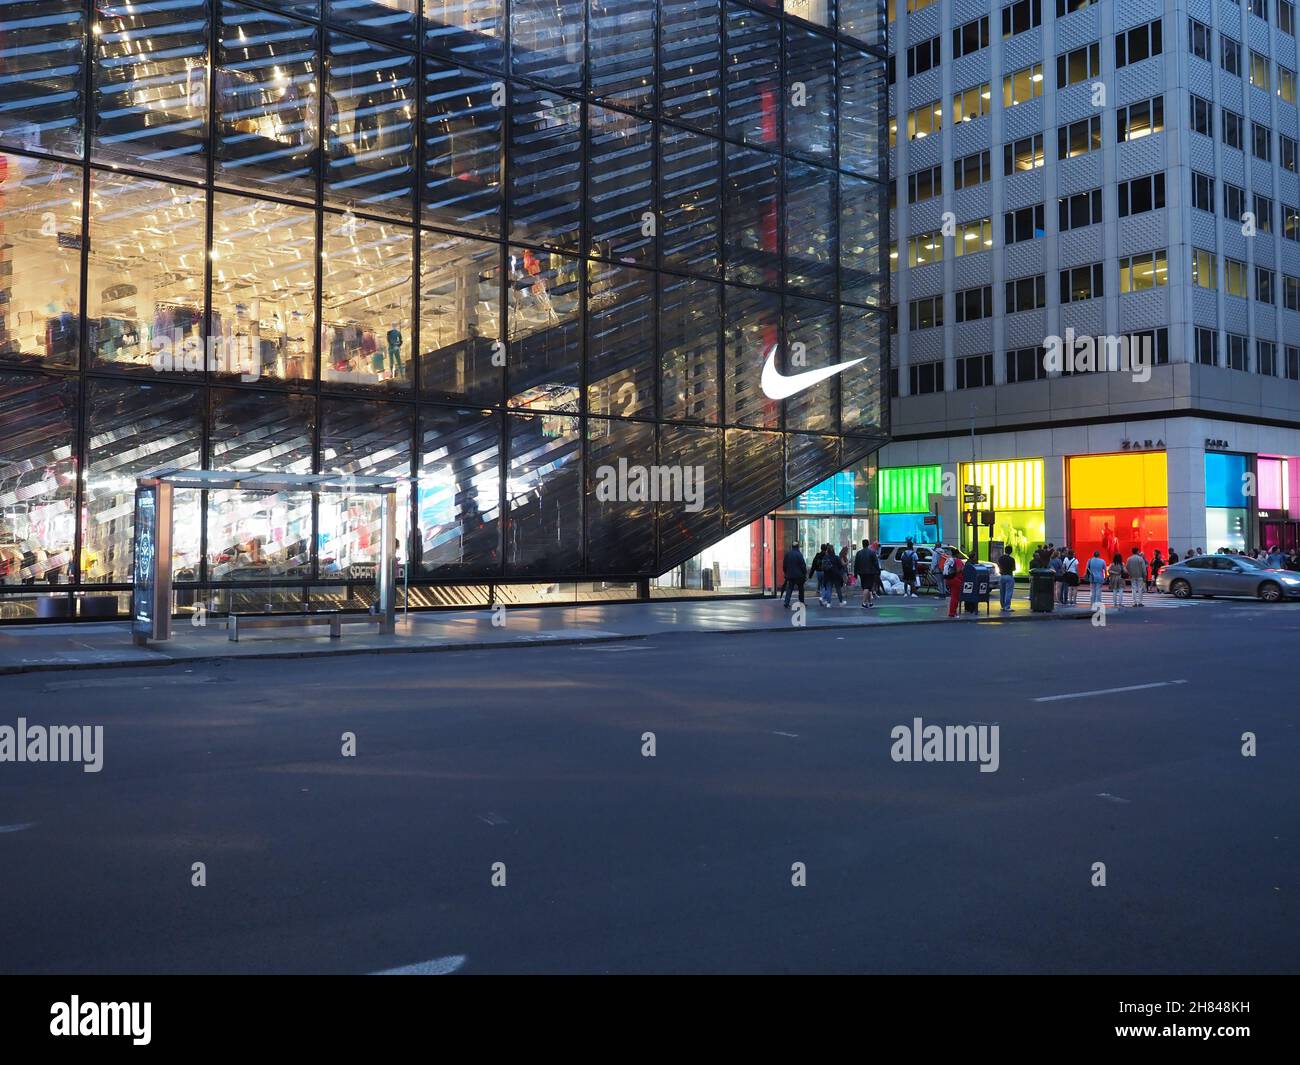 Image of the Nike store located on 5th Avenue. Stock Photo